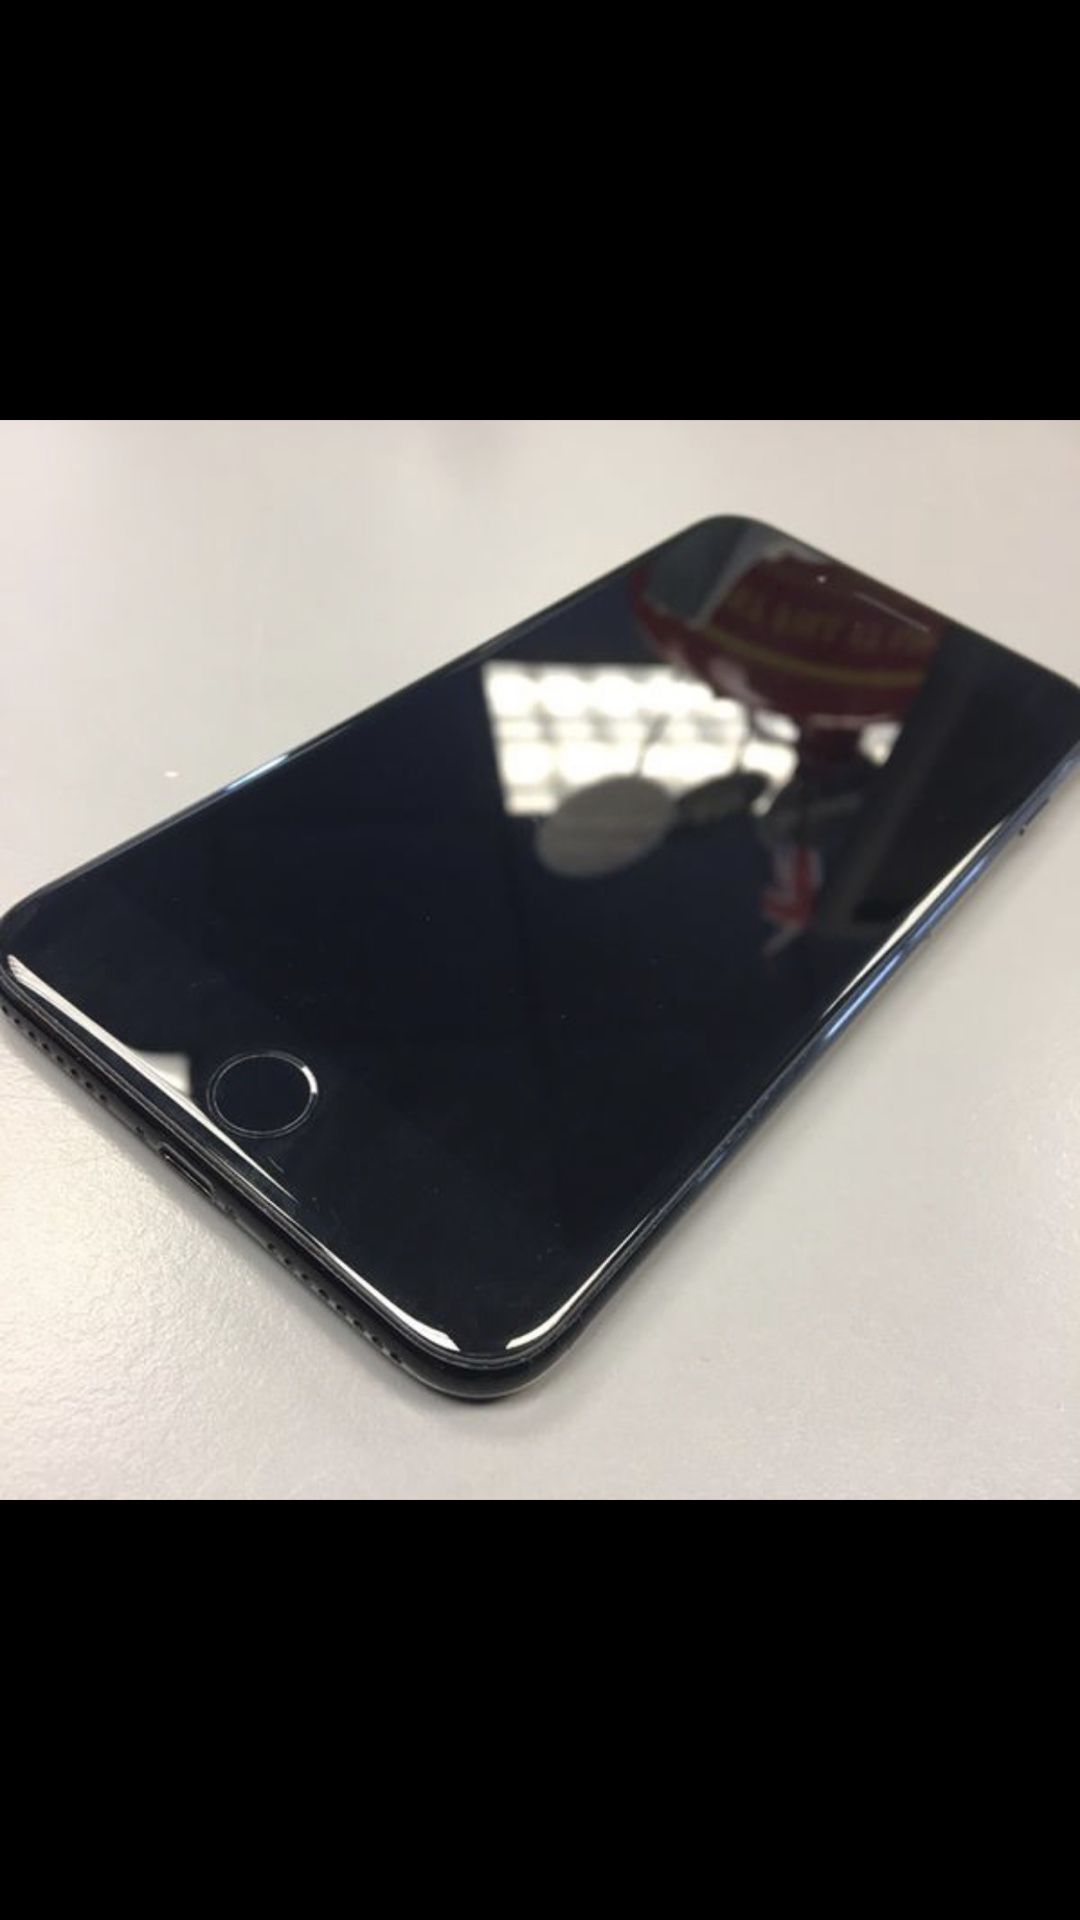 IPHONE 7 128gb MINT CONDITION